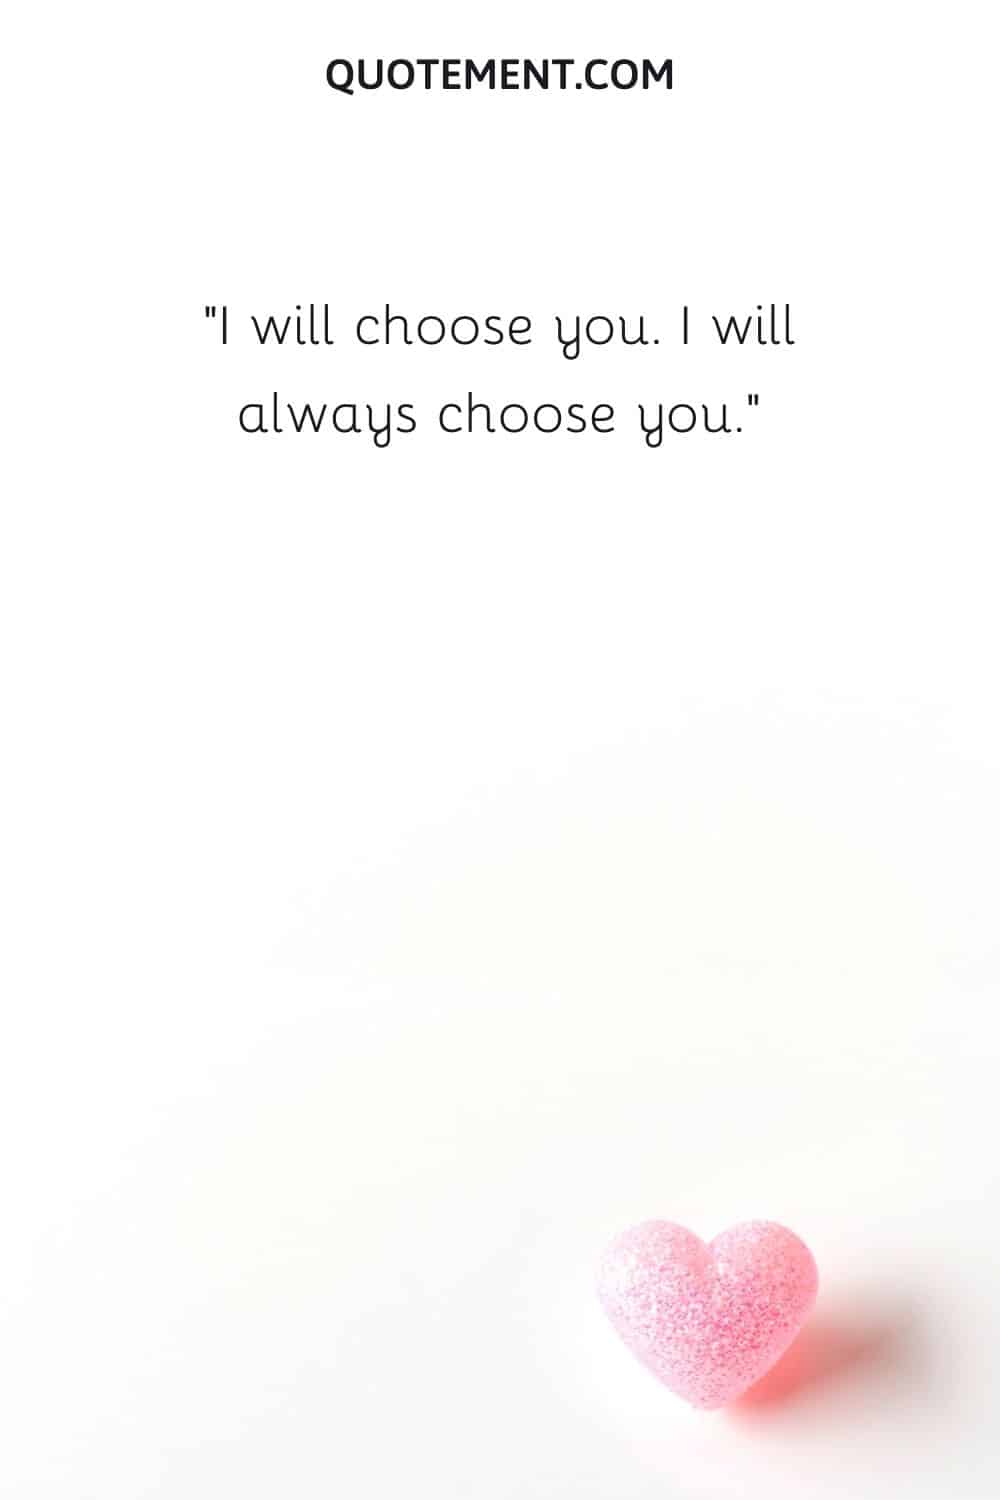 I will choose you.